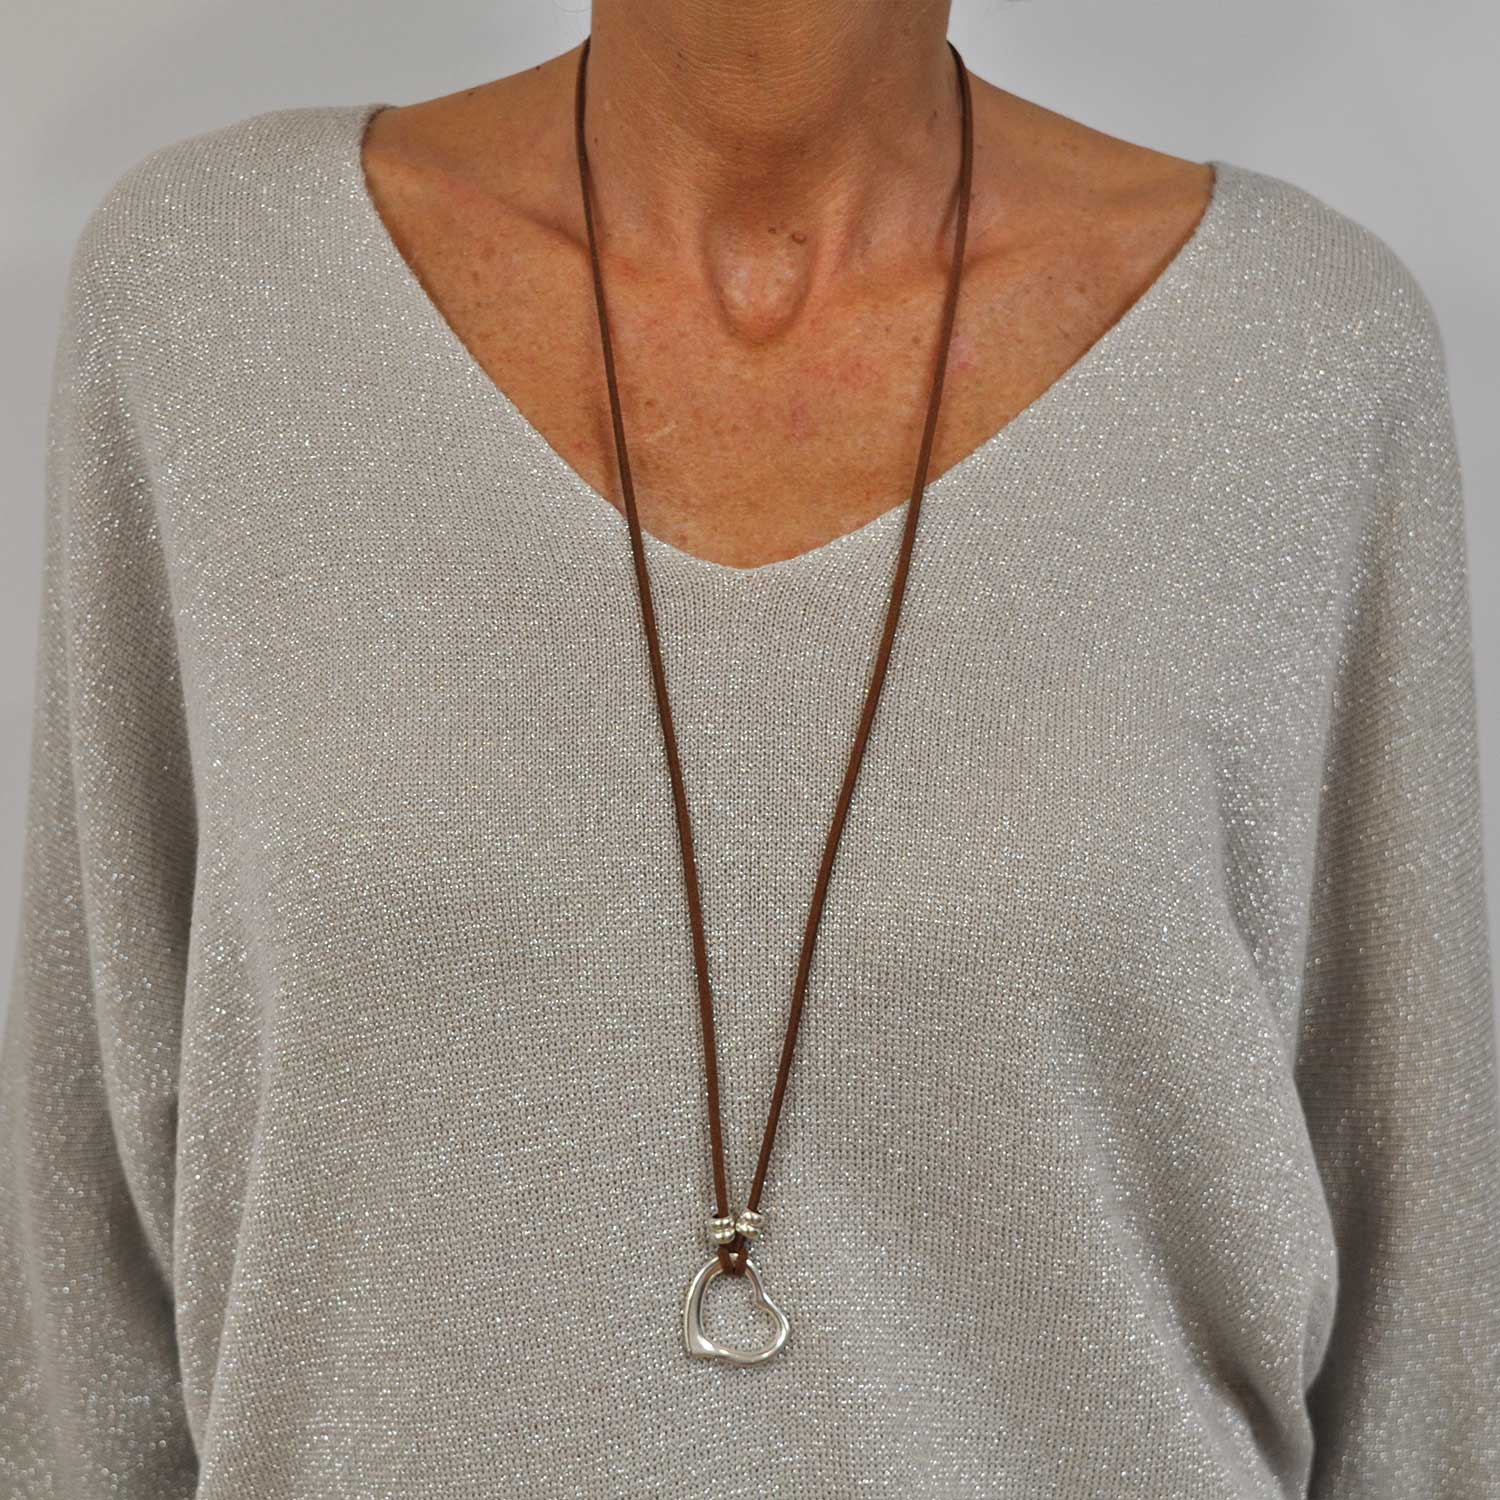 Long Heart Necklace